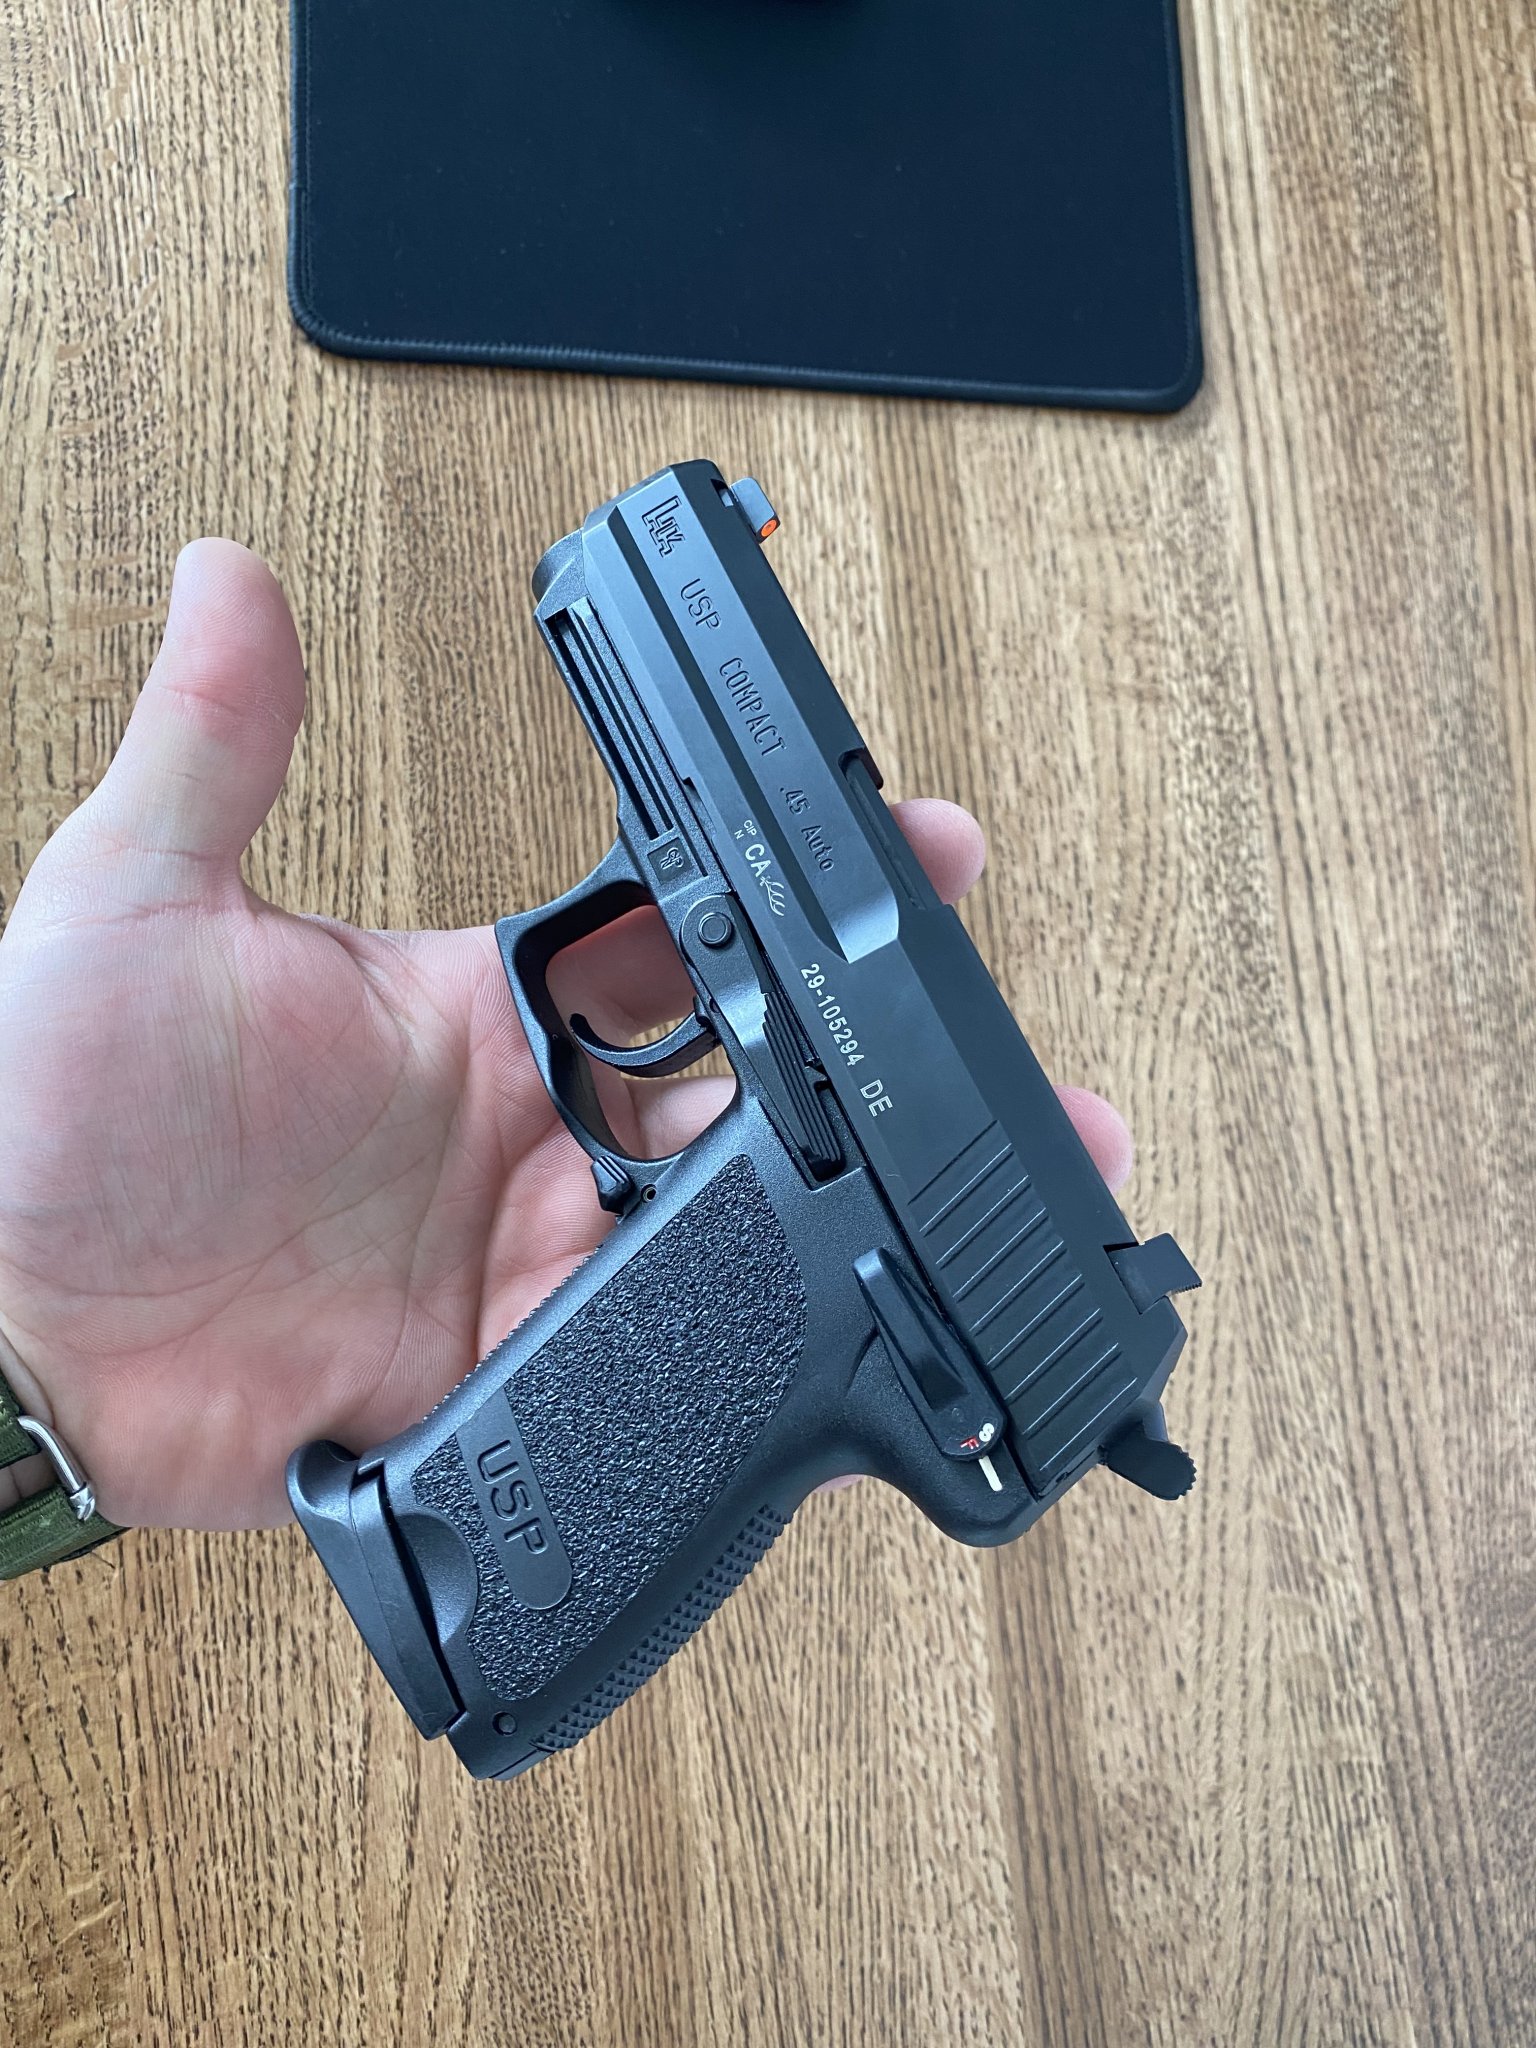 H&K USP Compact Review 